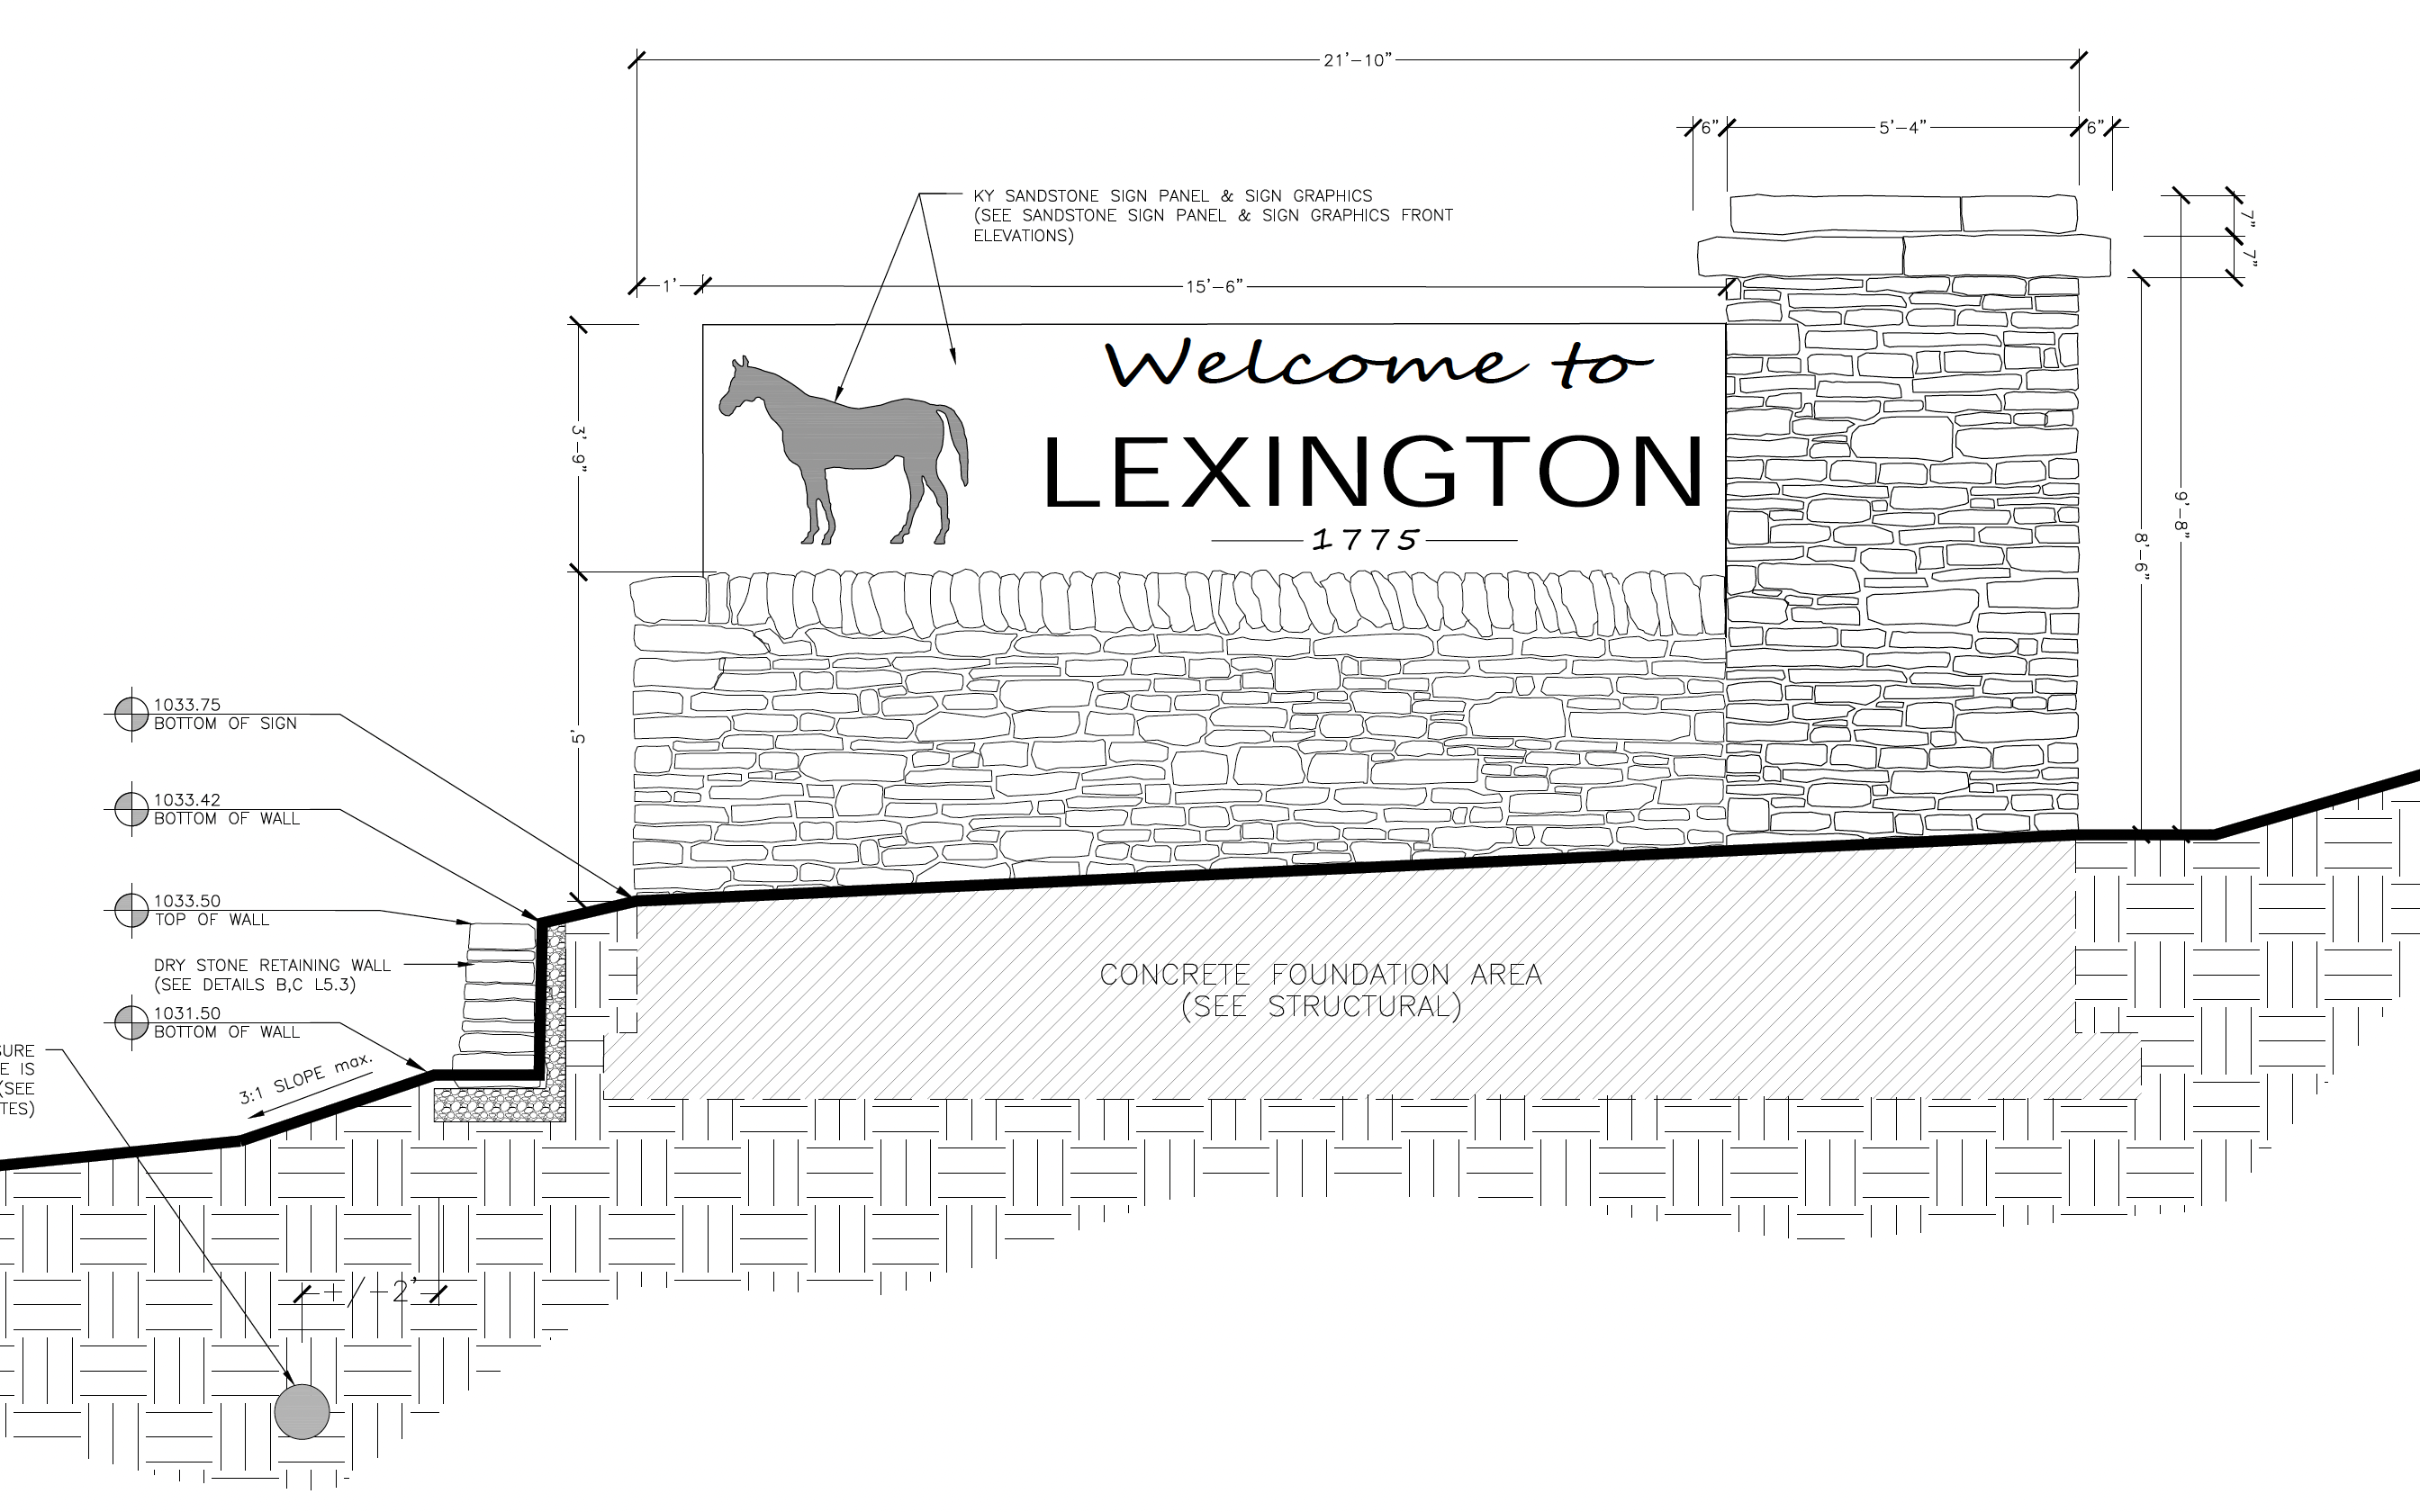 New details emerge on controversial $212K Lexington welcome sign